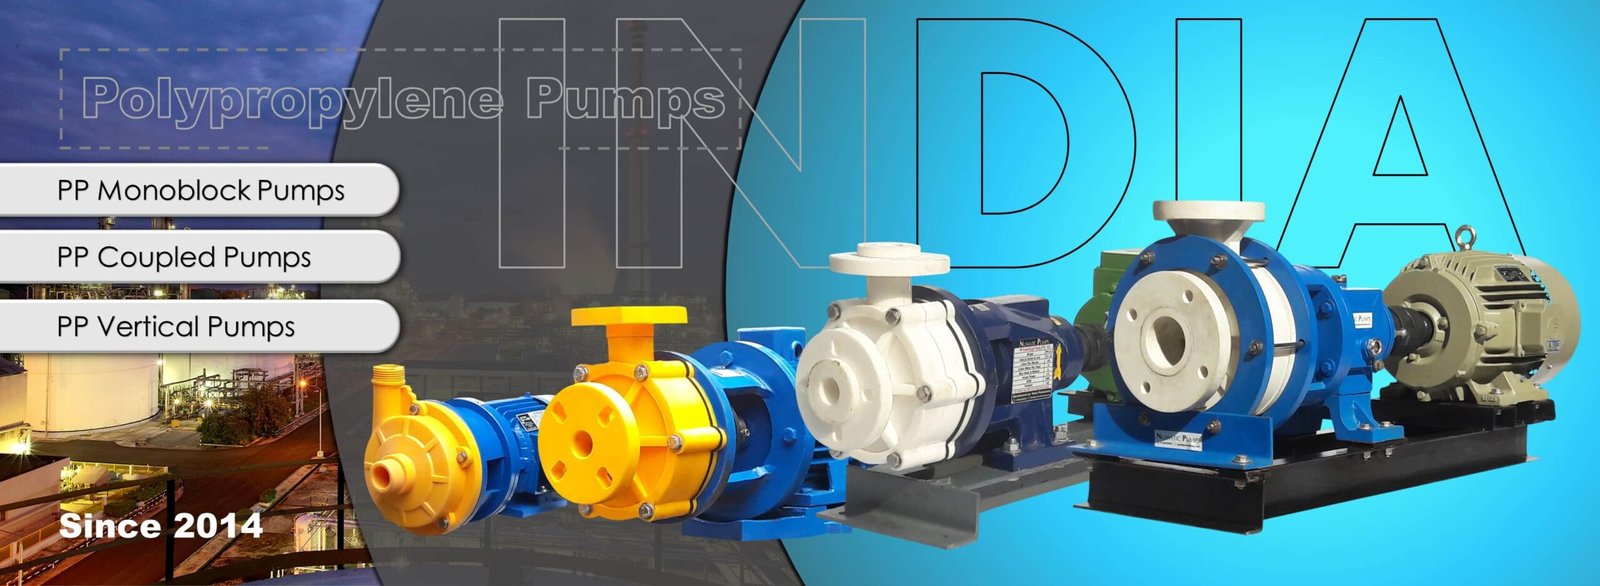 PP Pumps manufacturers in India